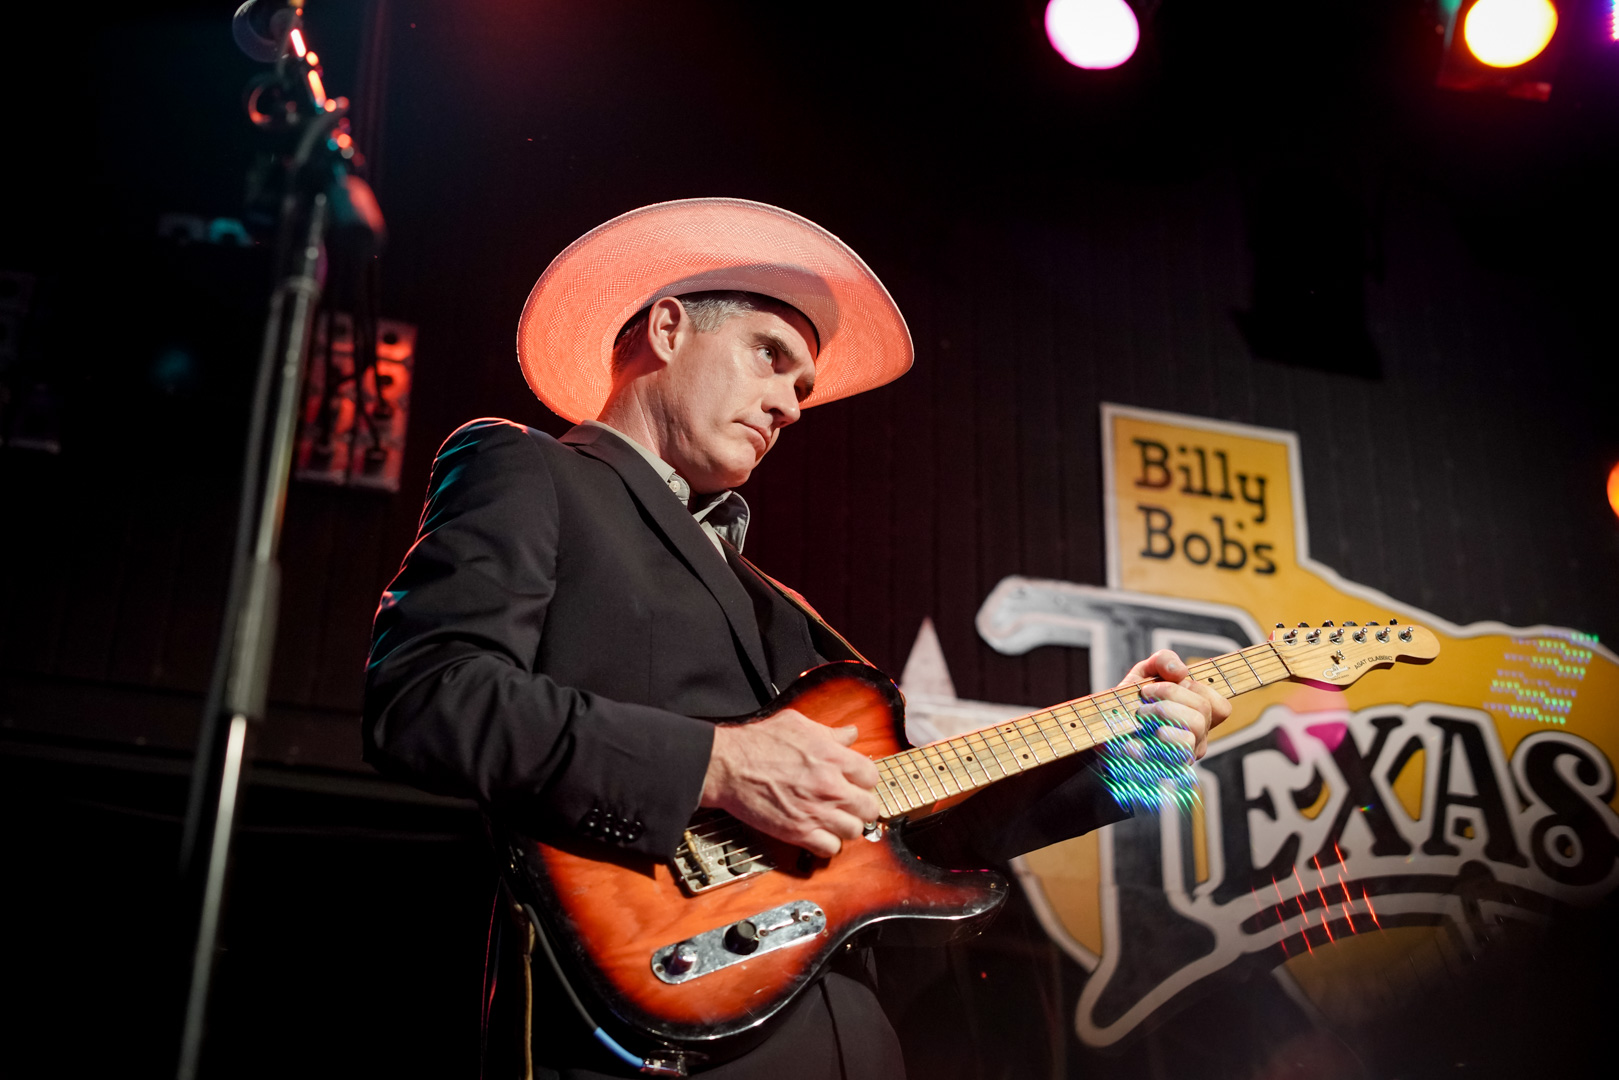 A guitar player on stage wearing cowboy hat